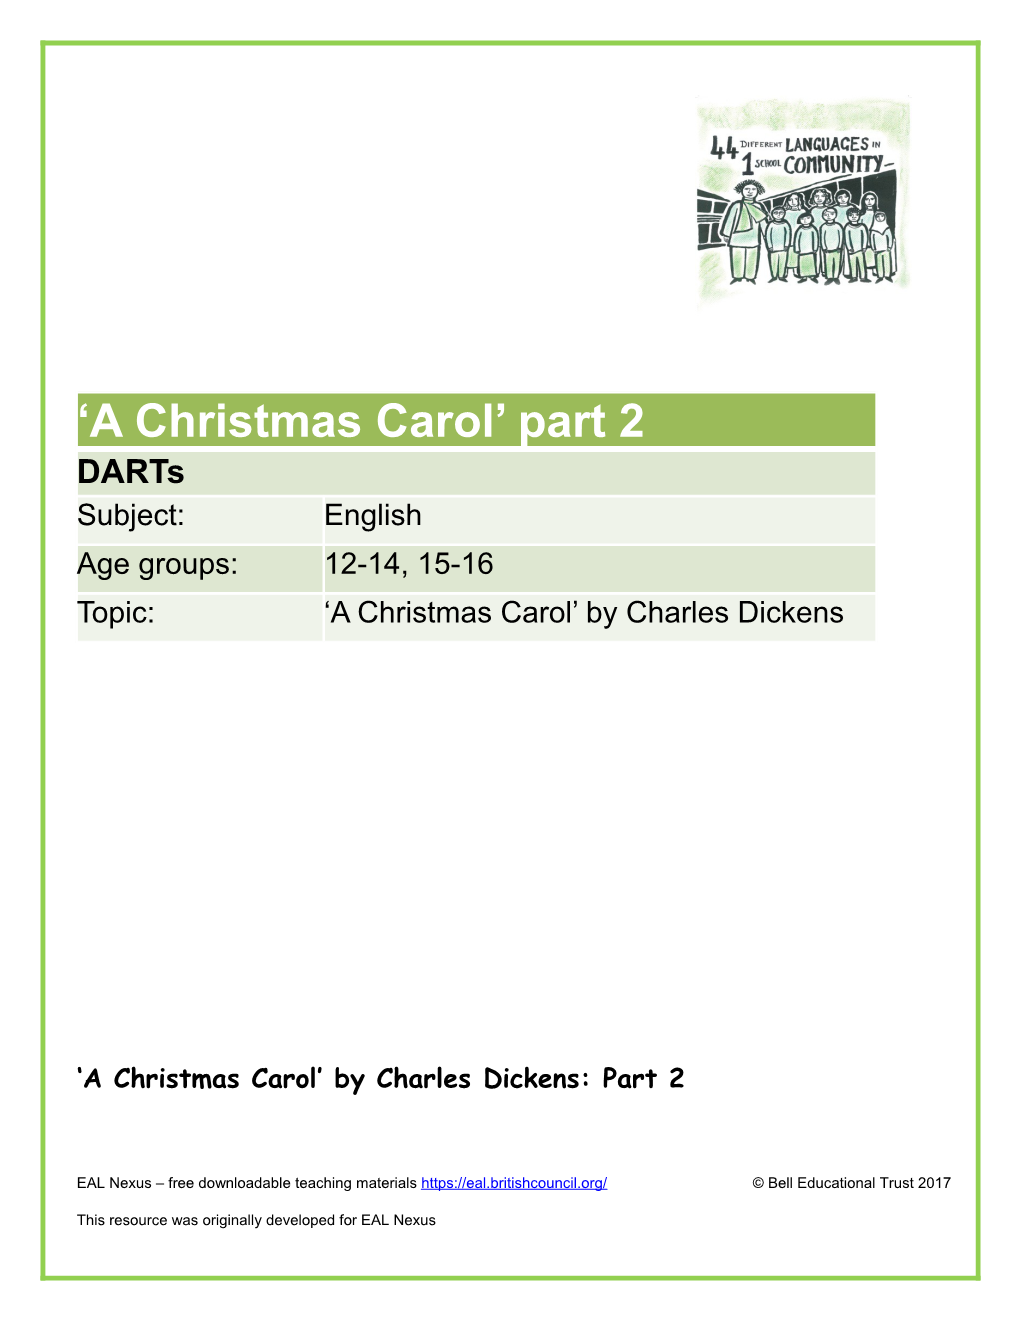 A Christmas Carol by Charles Dickens: Part2